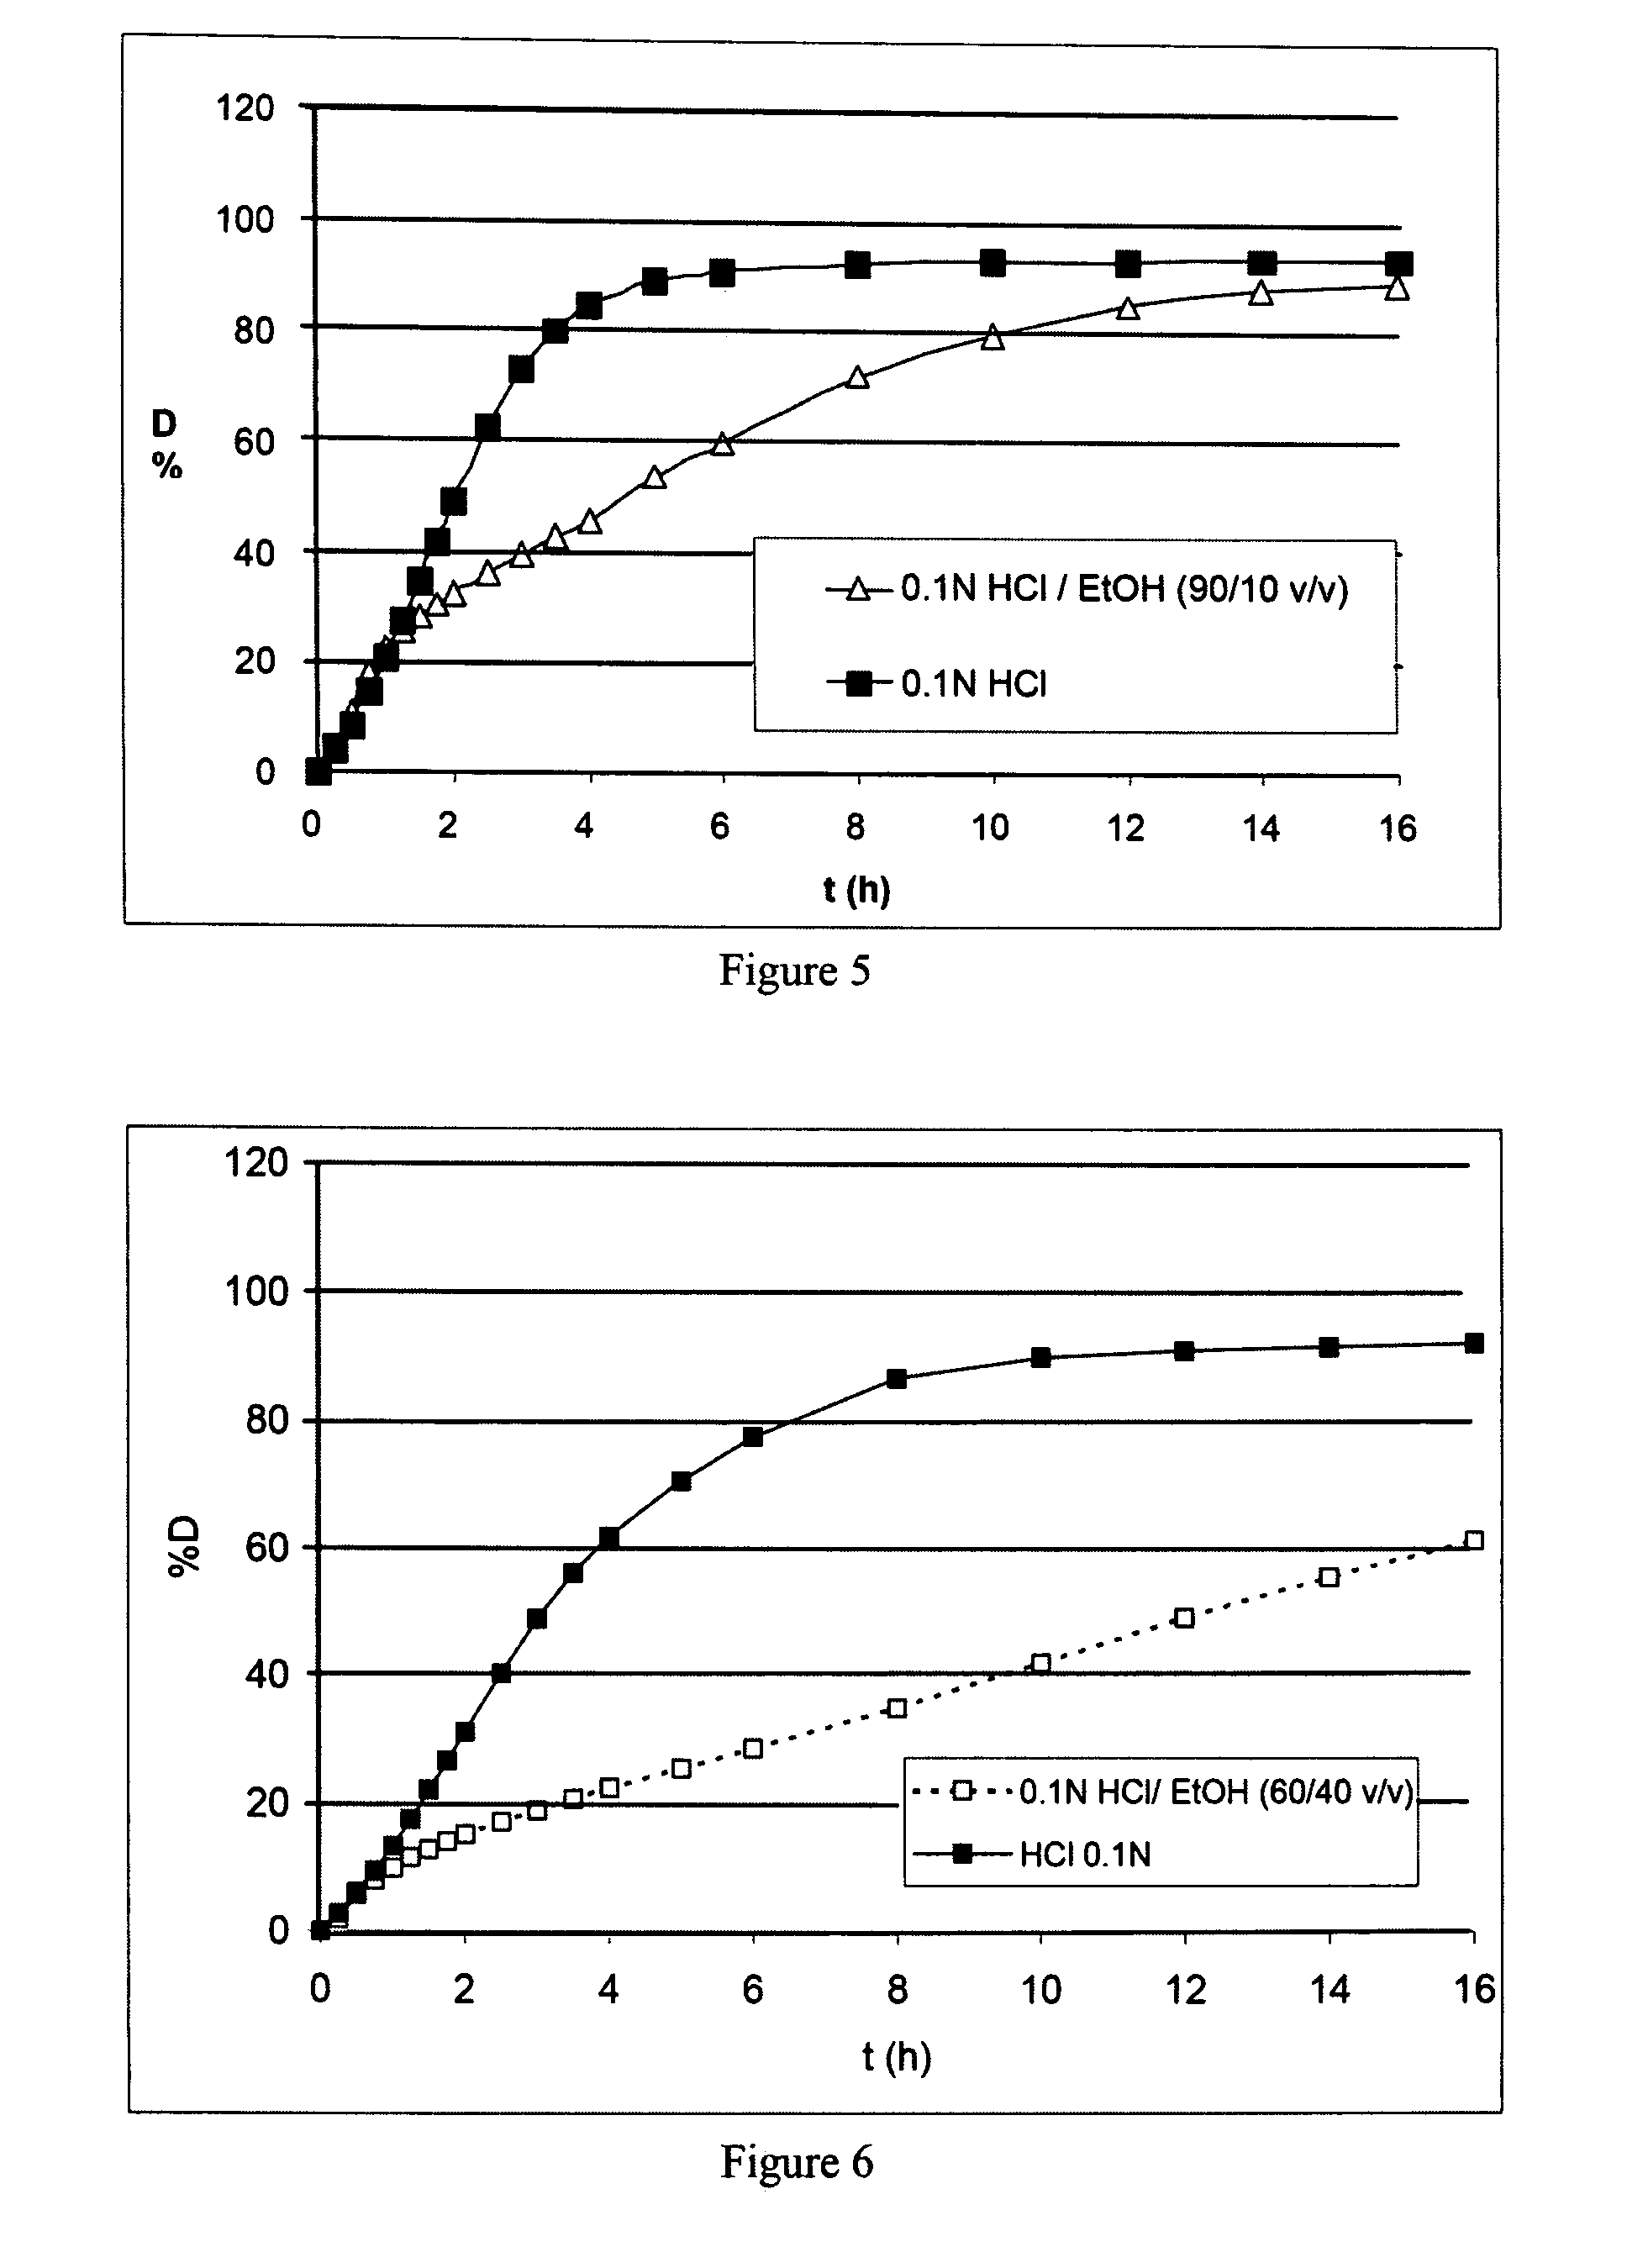 Prolonged-release multimicroparticulate oral pharmaceutical form